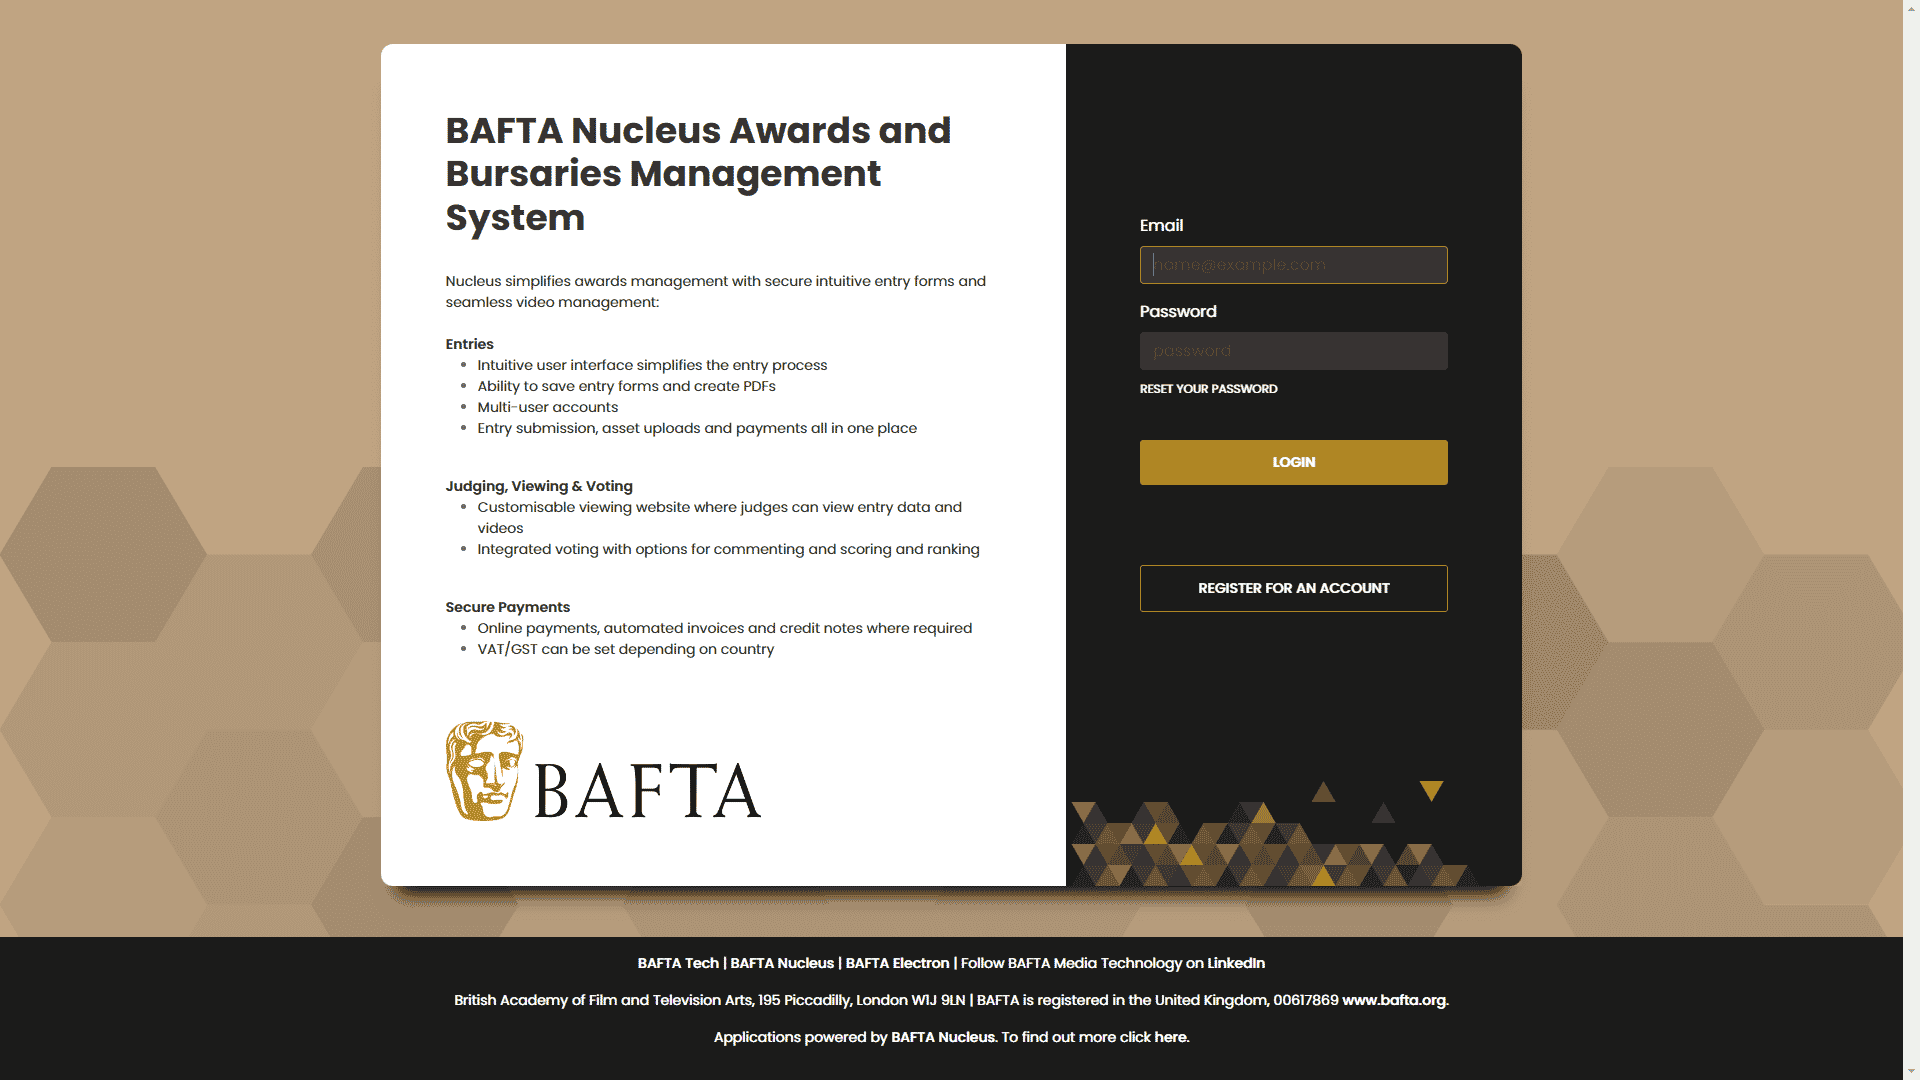 Implementation of BAFTA Nucleus Responsive and Accessible Design